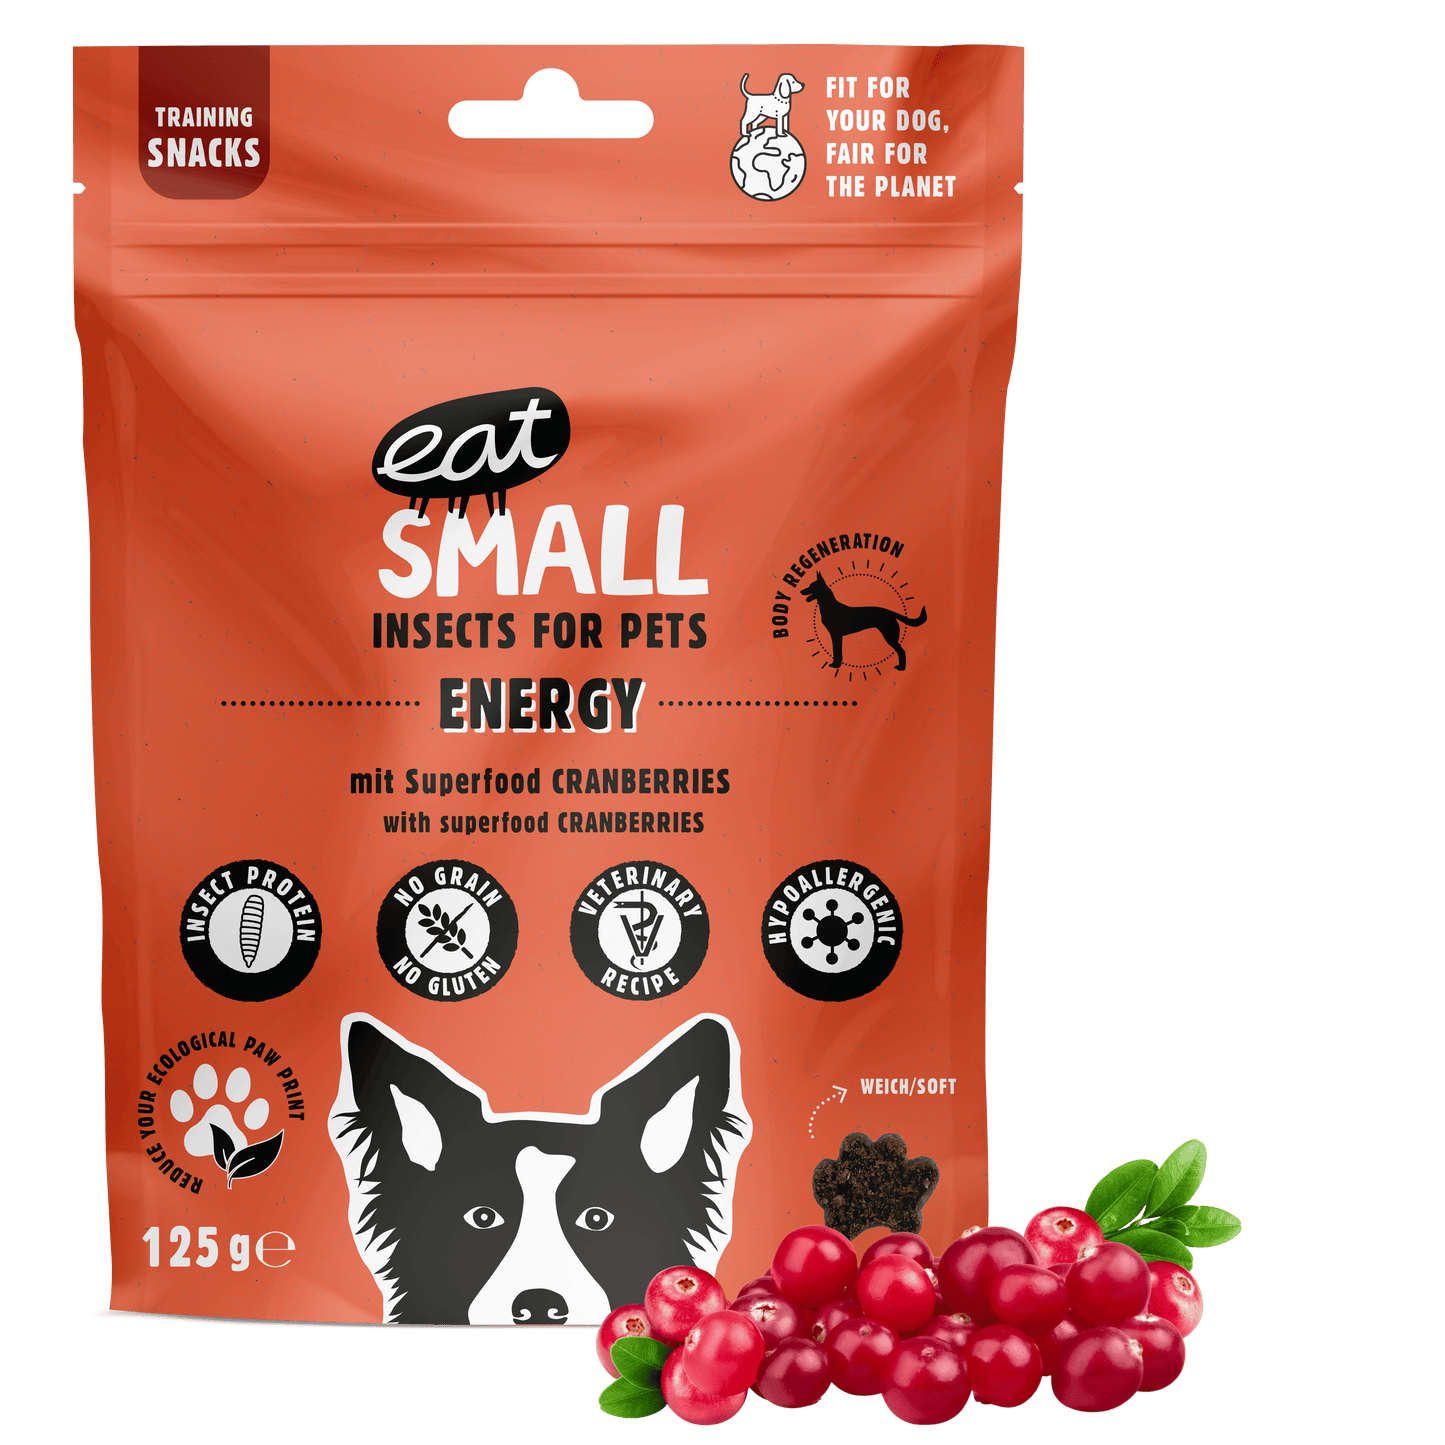 ENERGY – Insect & Cranberry